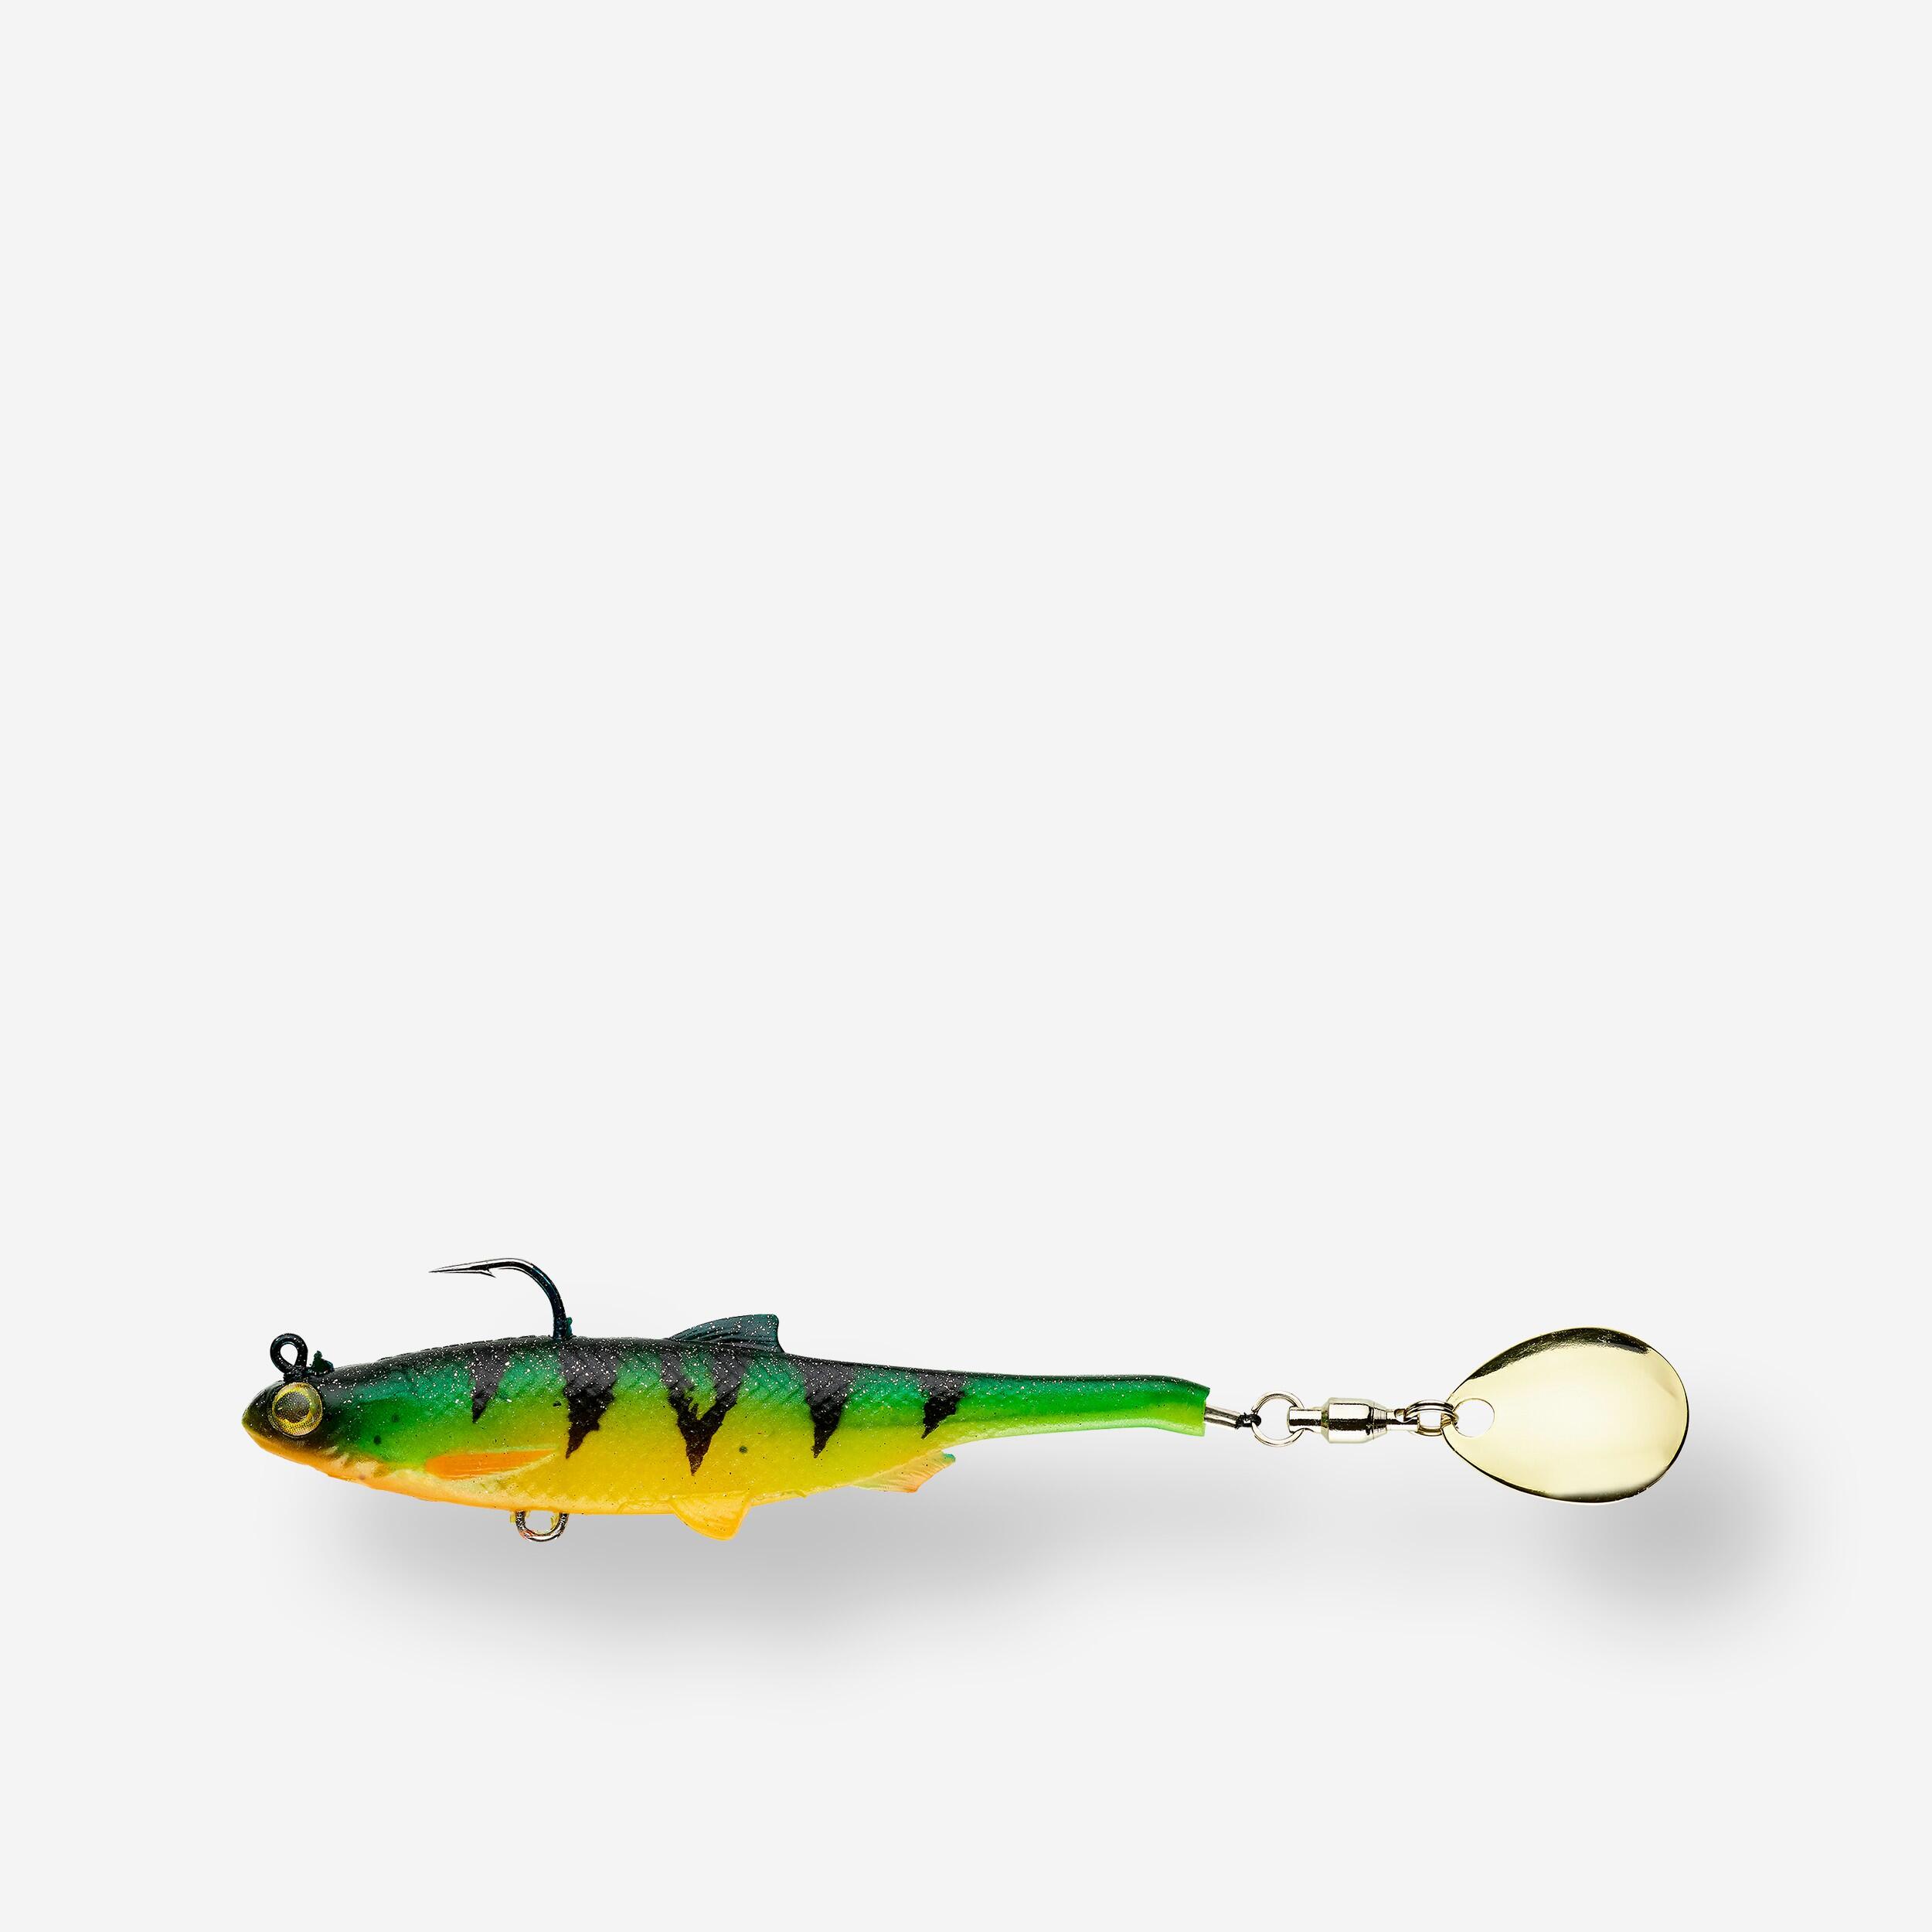 Caperlan Lure Fishing Roachspin 70 Firetiger Bladed Shad Soft Lure - One Size